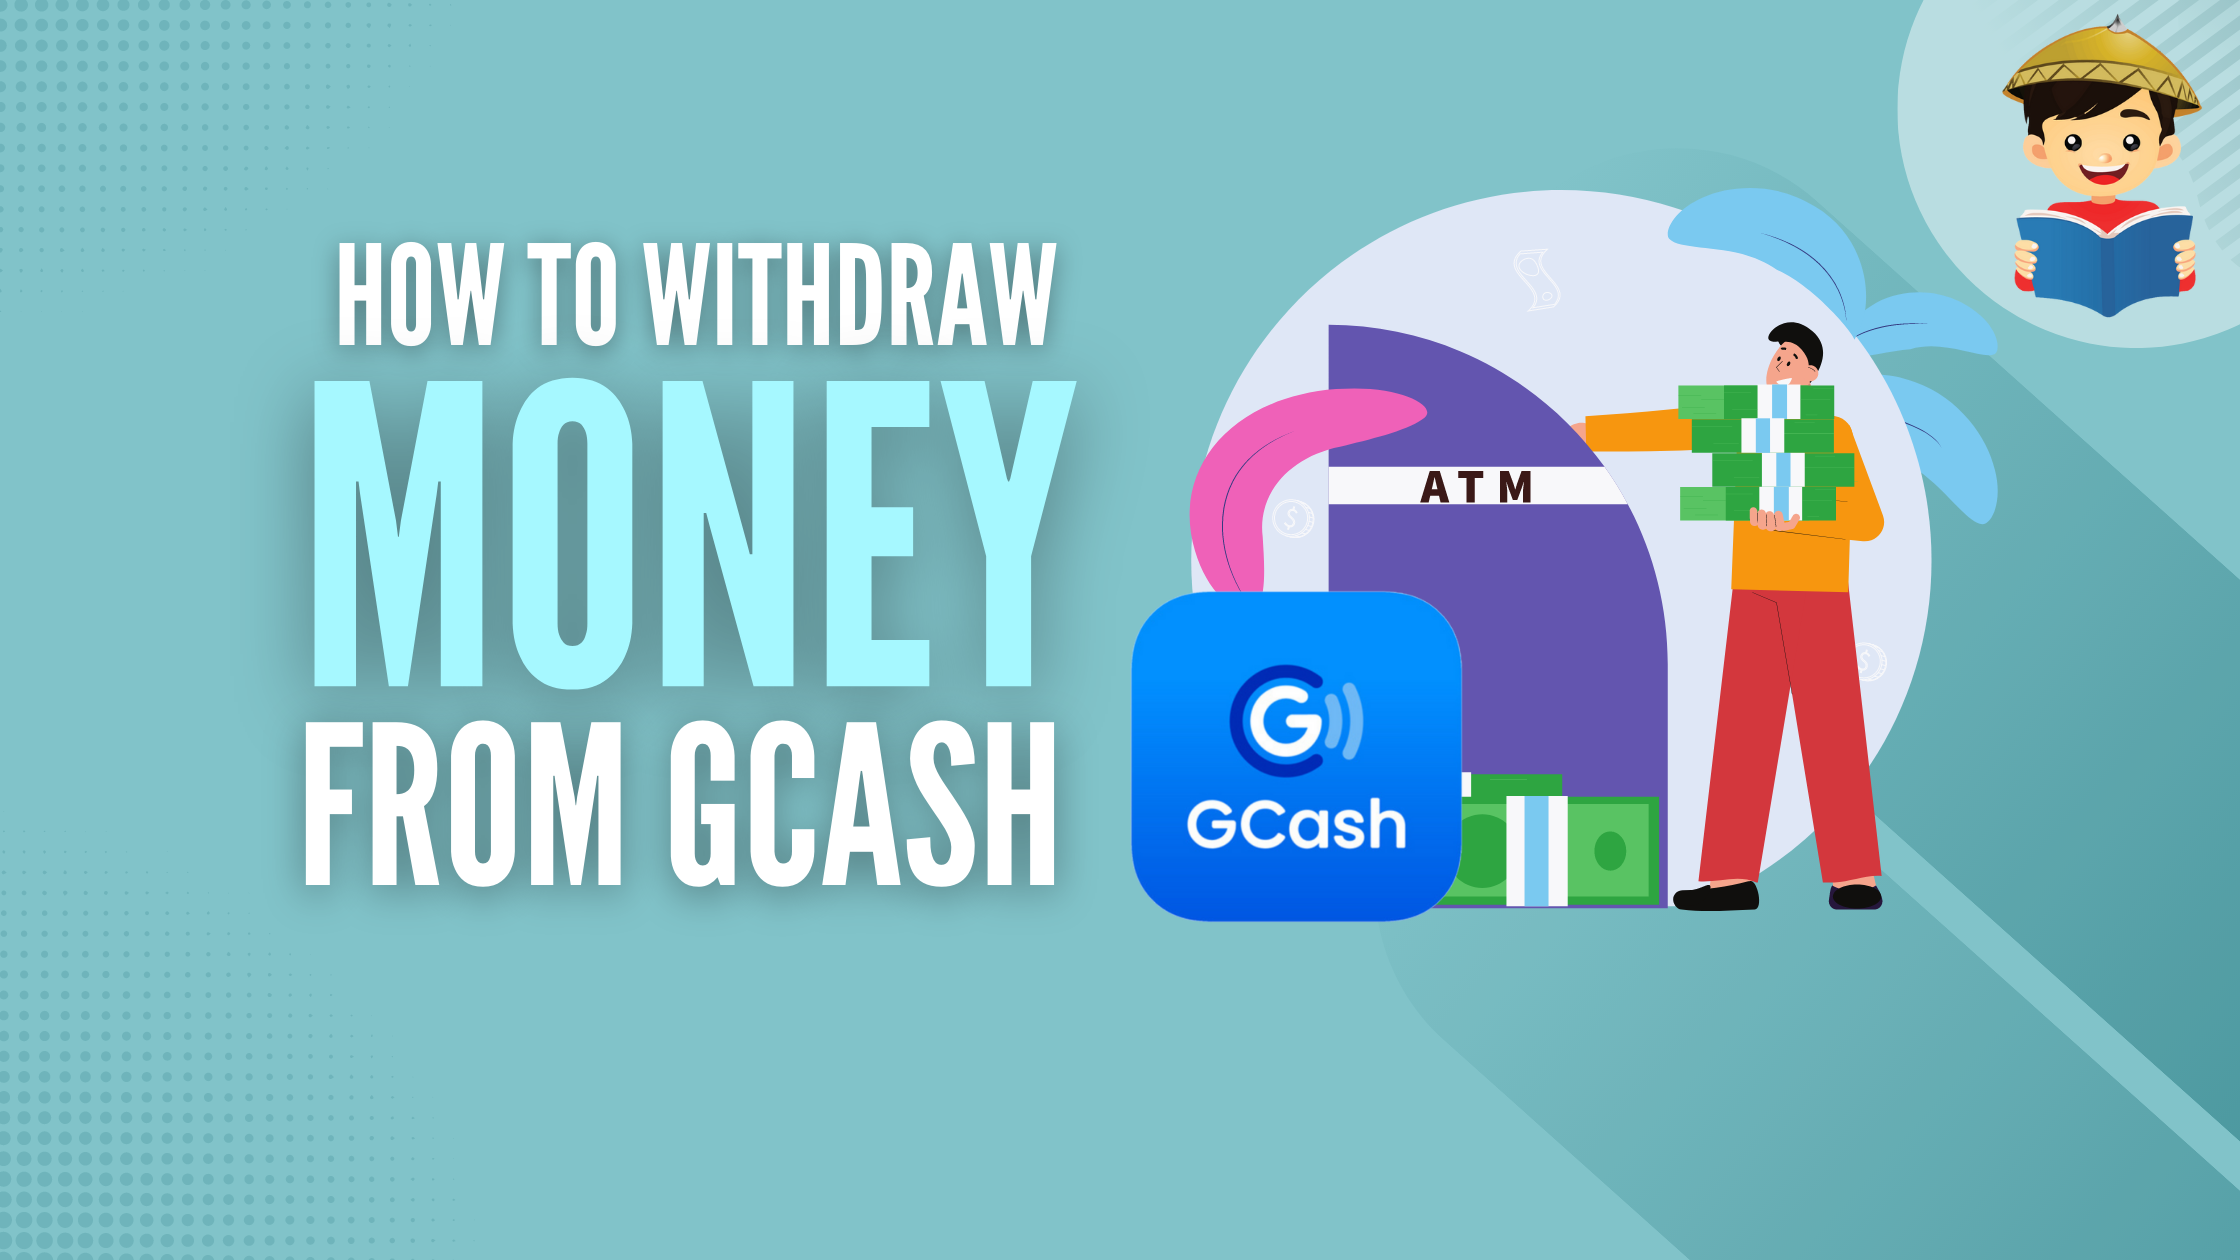 how to withdraw money from gcash featured image